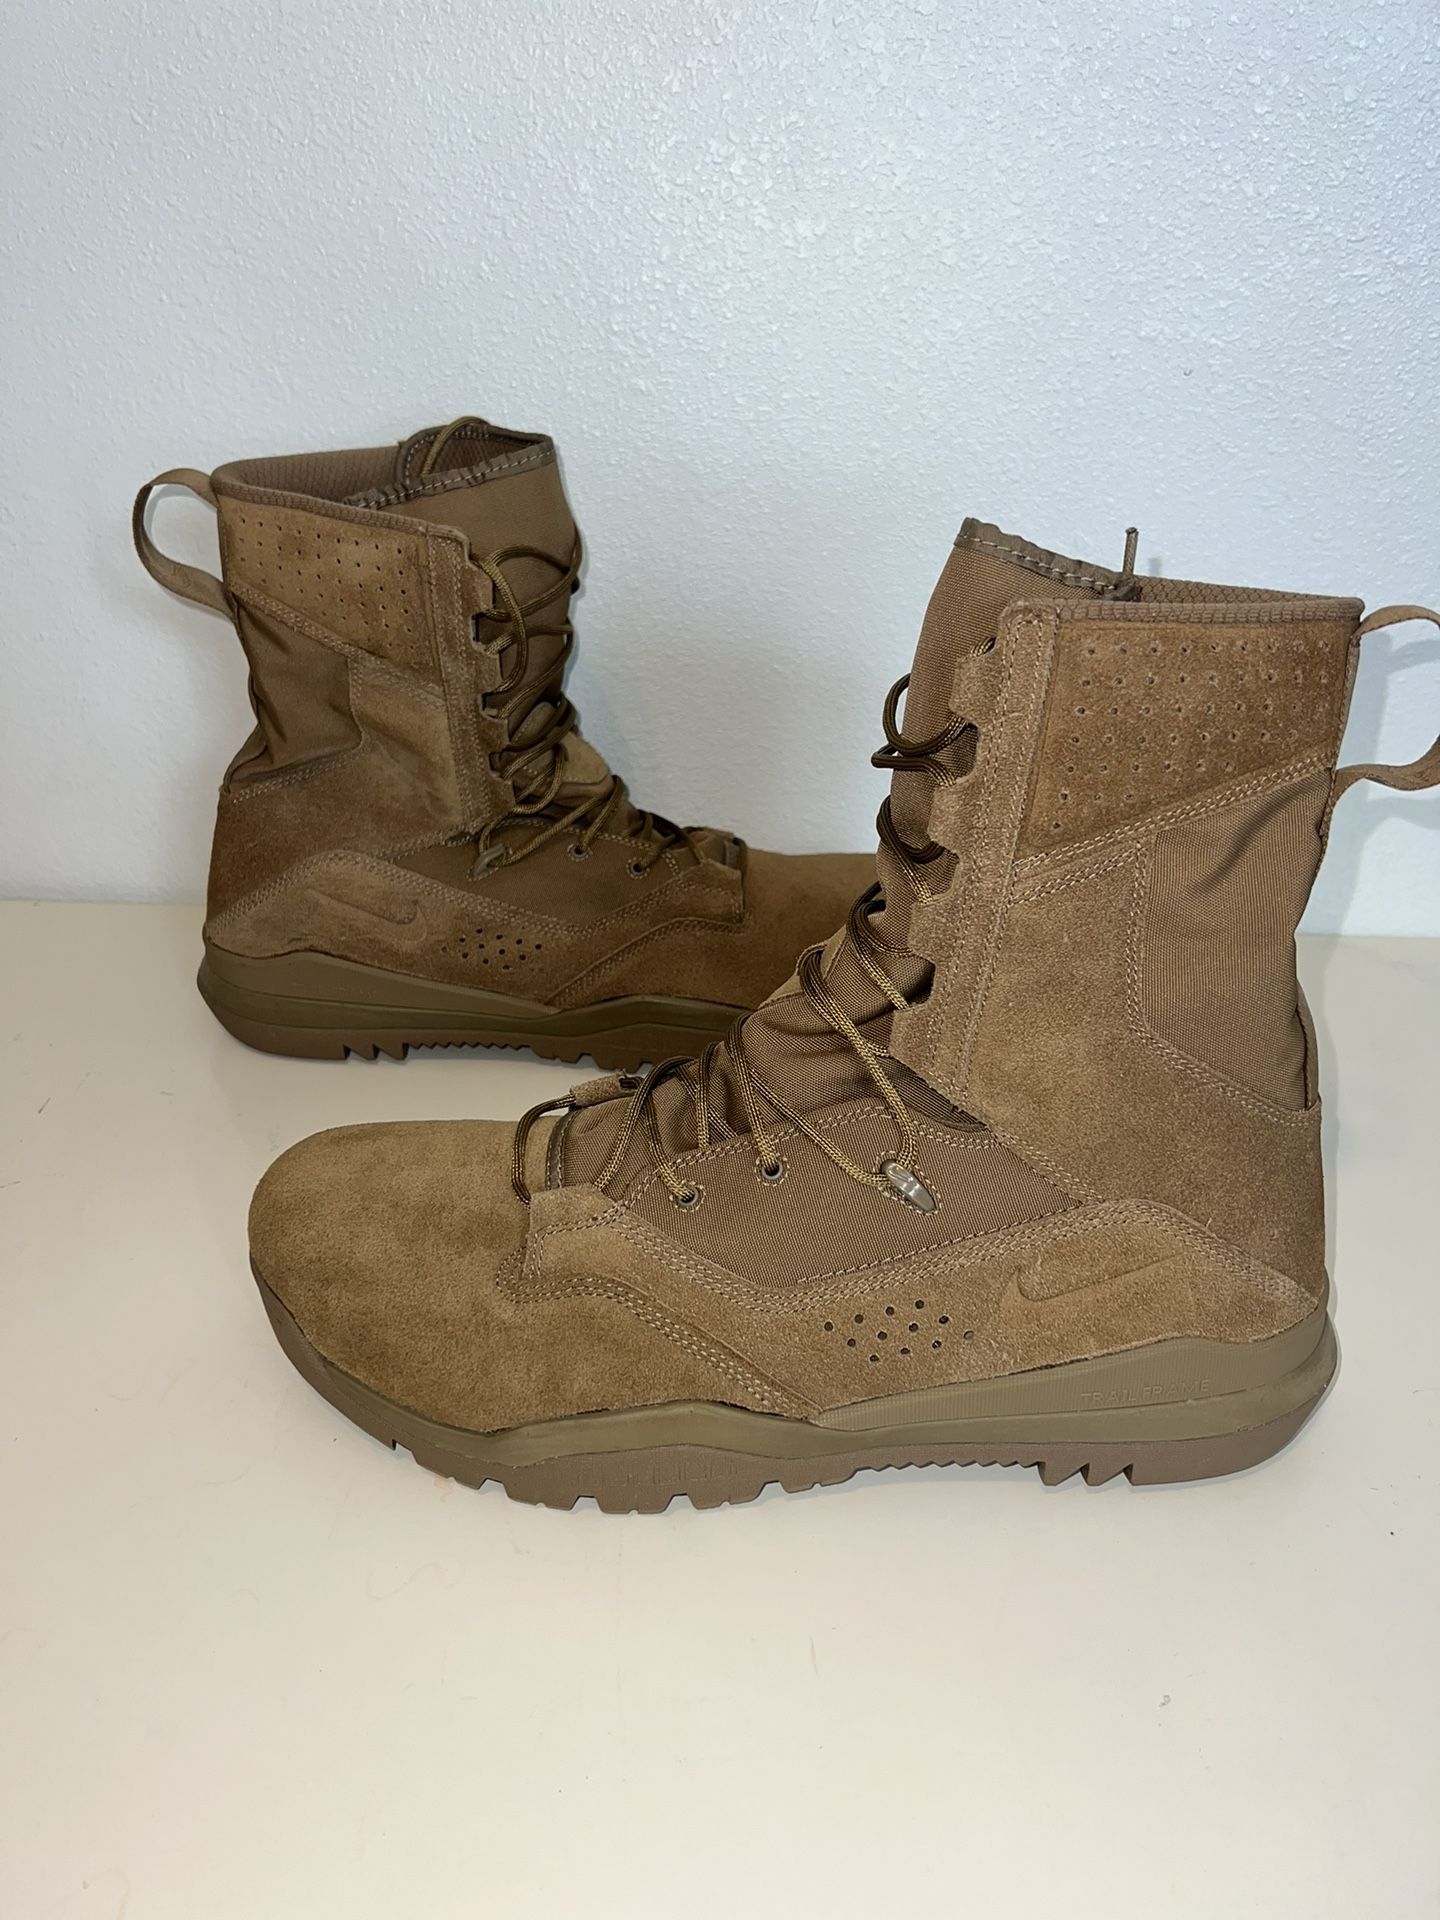 Nike SFB Field 2 - 8" Military Leather Tactical Boots Size 15 AQ1202-900 NEW